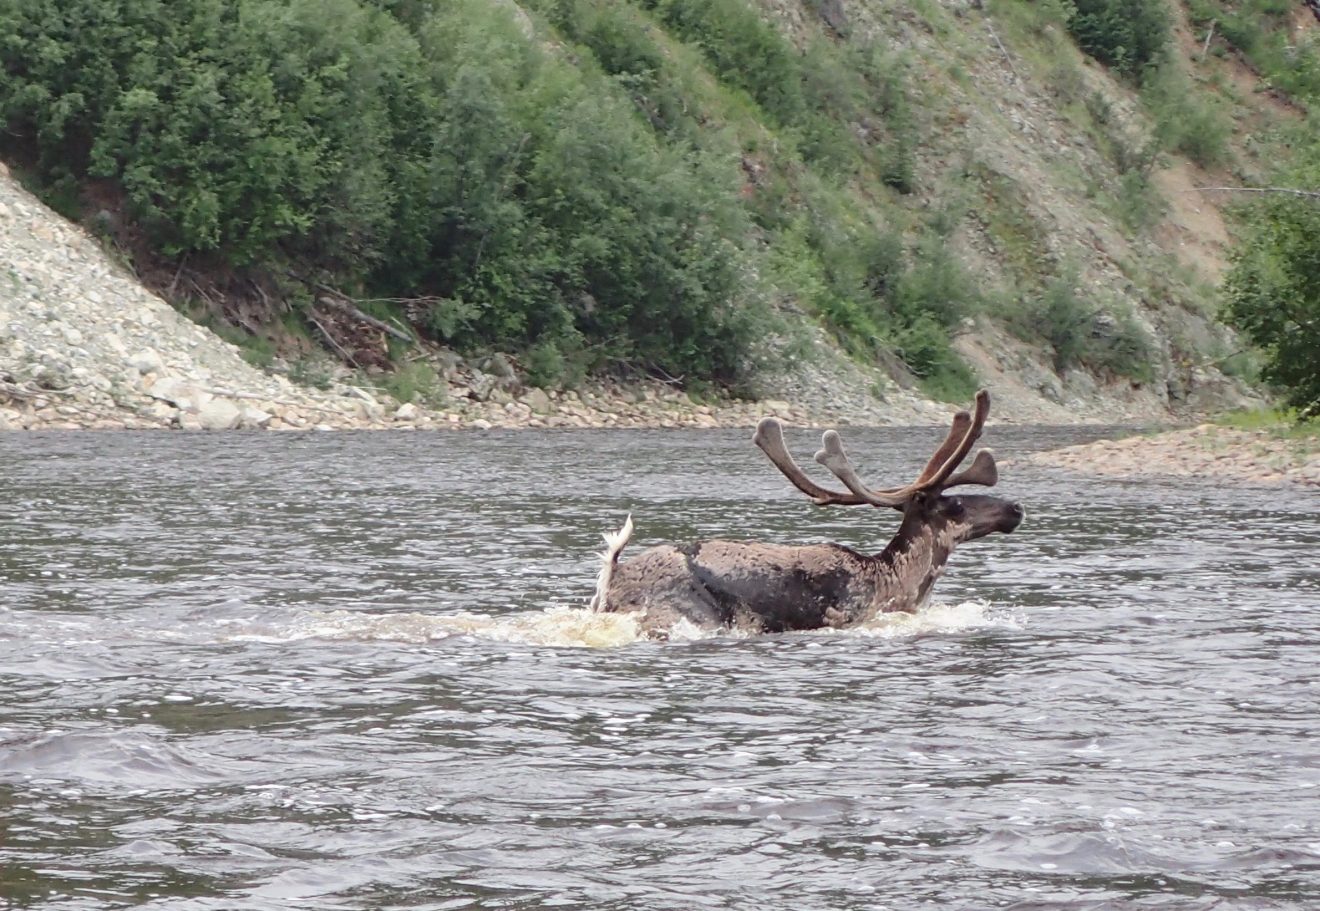 Parting a sea of Fortymile caribou